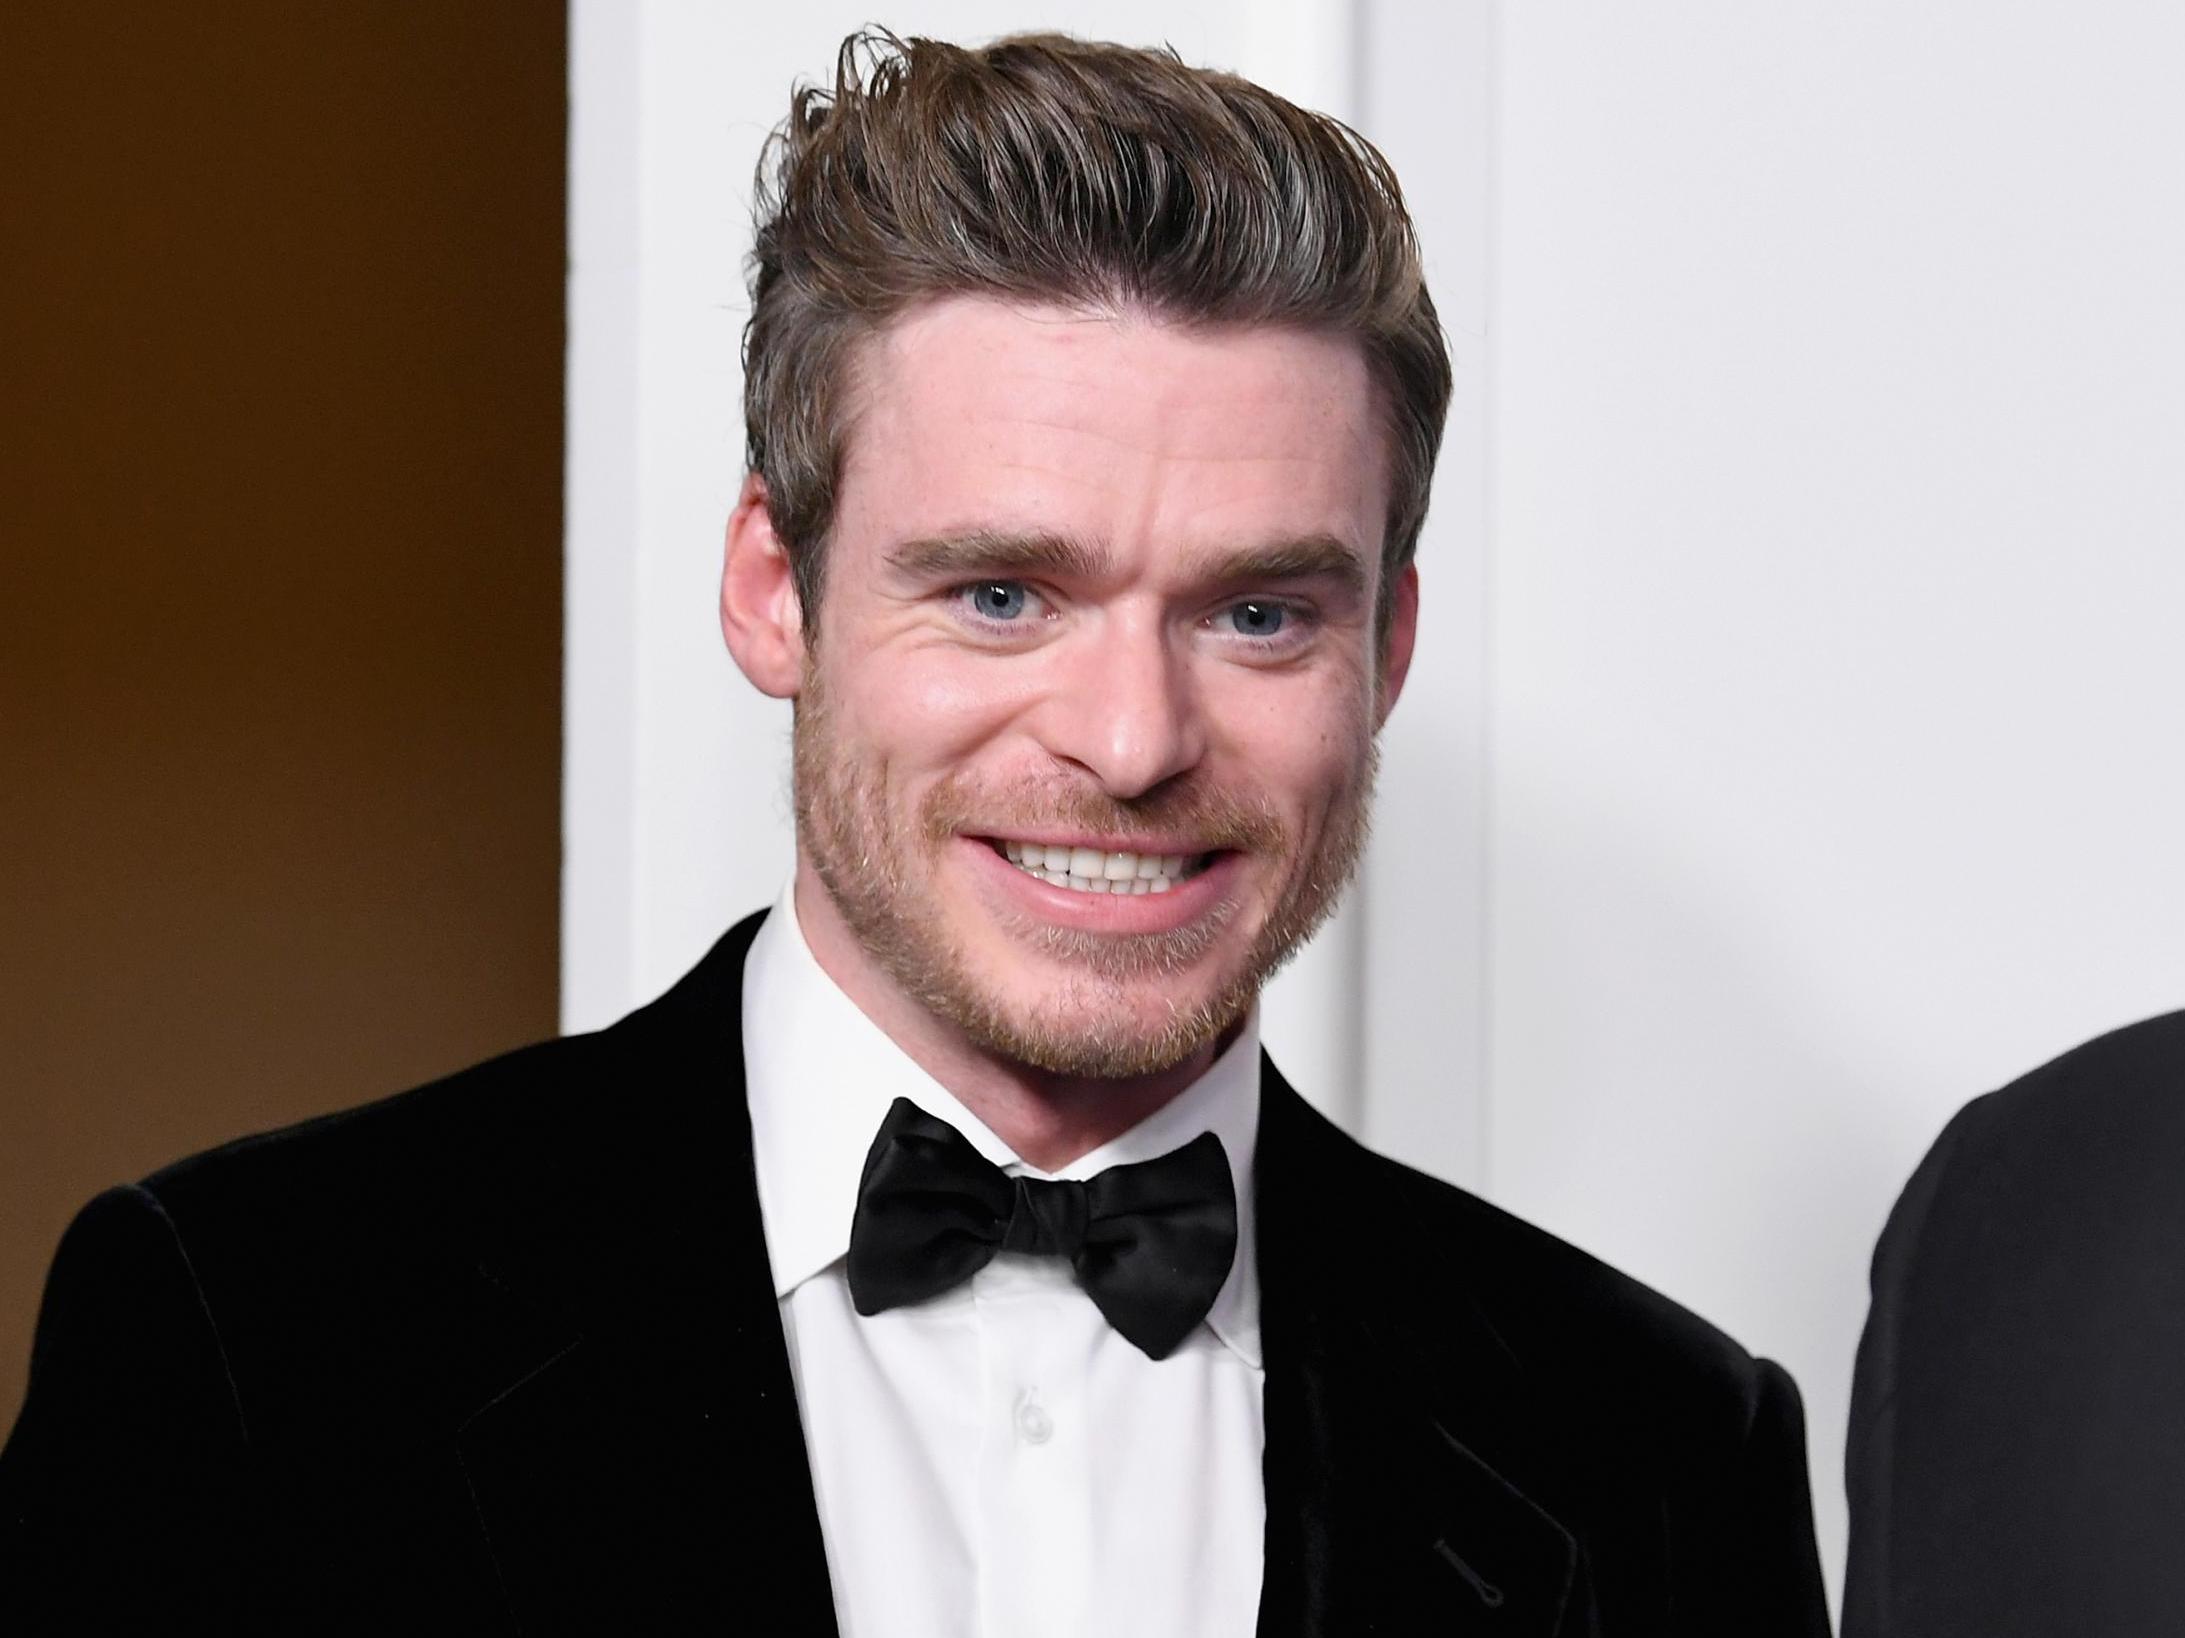 Best Performance by an Actor in a Television Series - Drama: Richard Madden (Bodyguard)